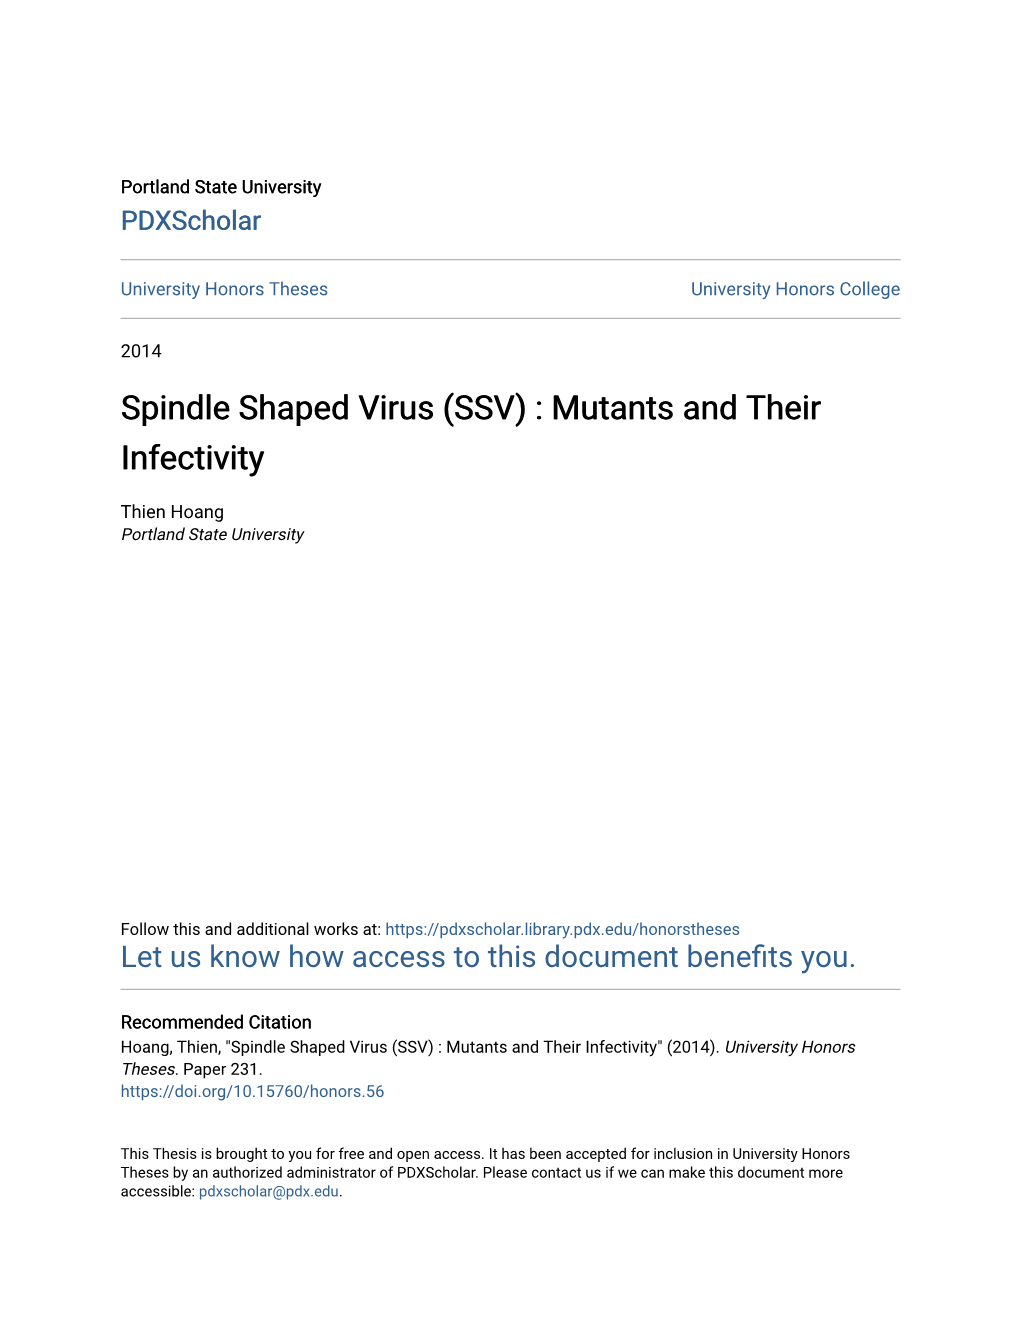 Spindle Shaped Virus (SSV) : Mutants and Their Infectivity